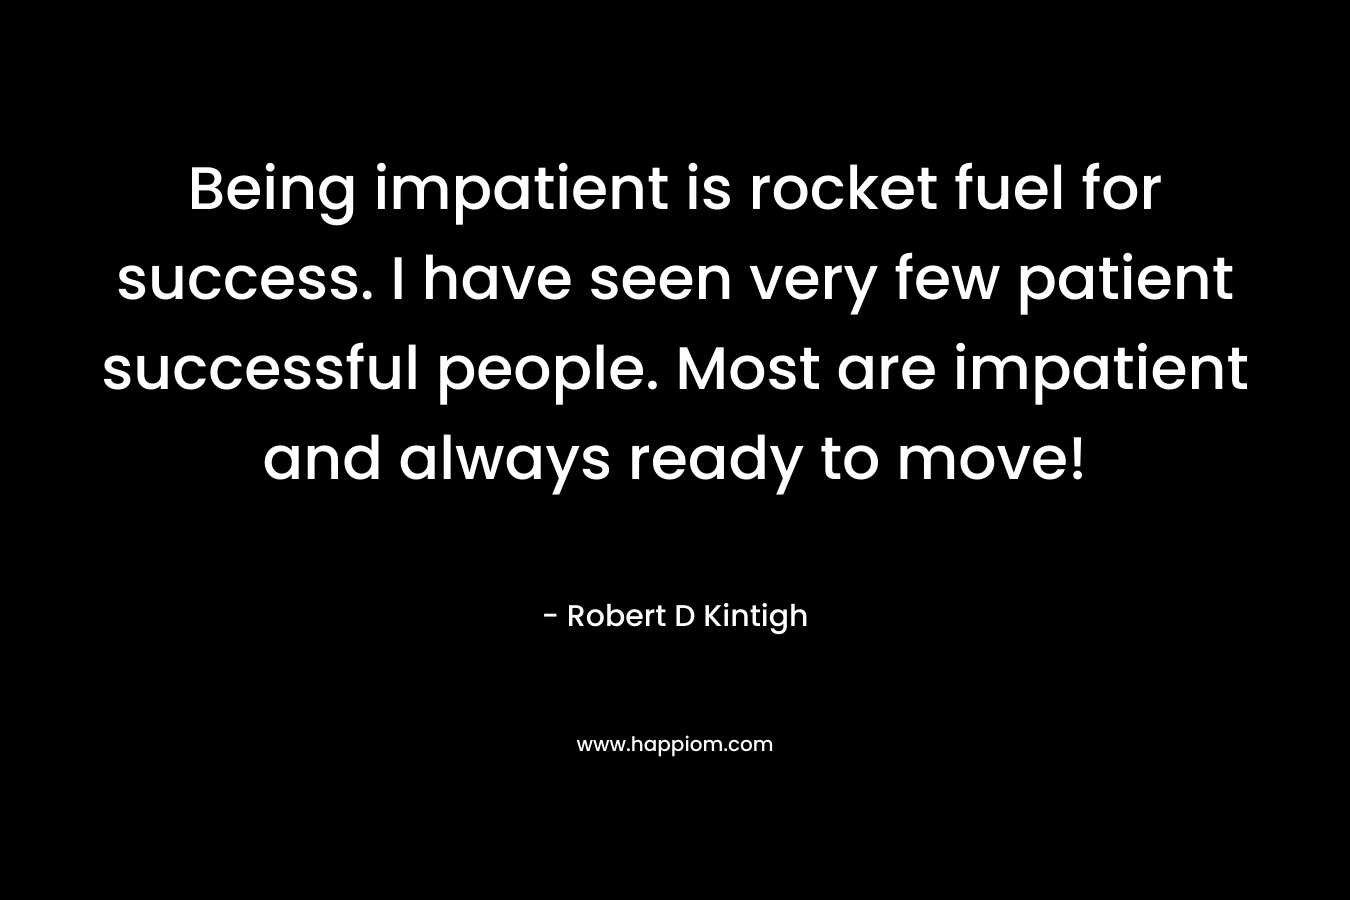 Being impatient is rocket fuel for success. I have seen very few patient successful people. Most are impatient and always ready to move!